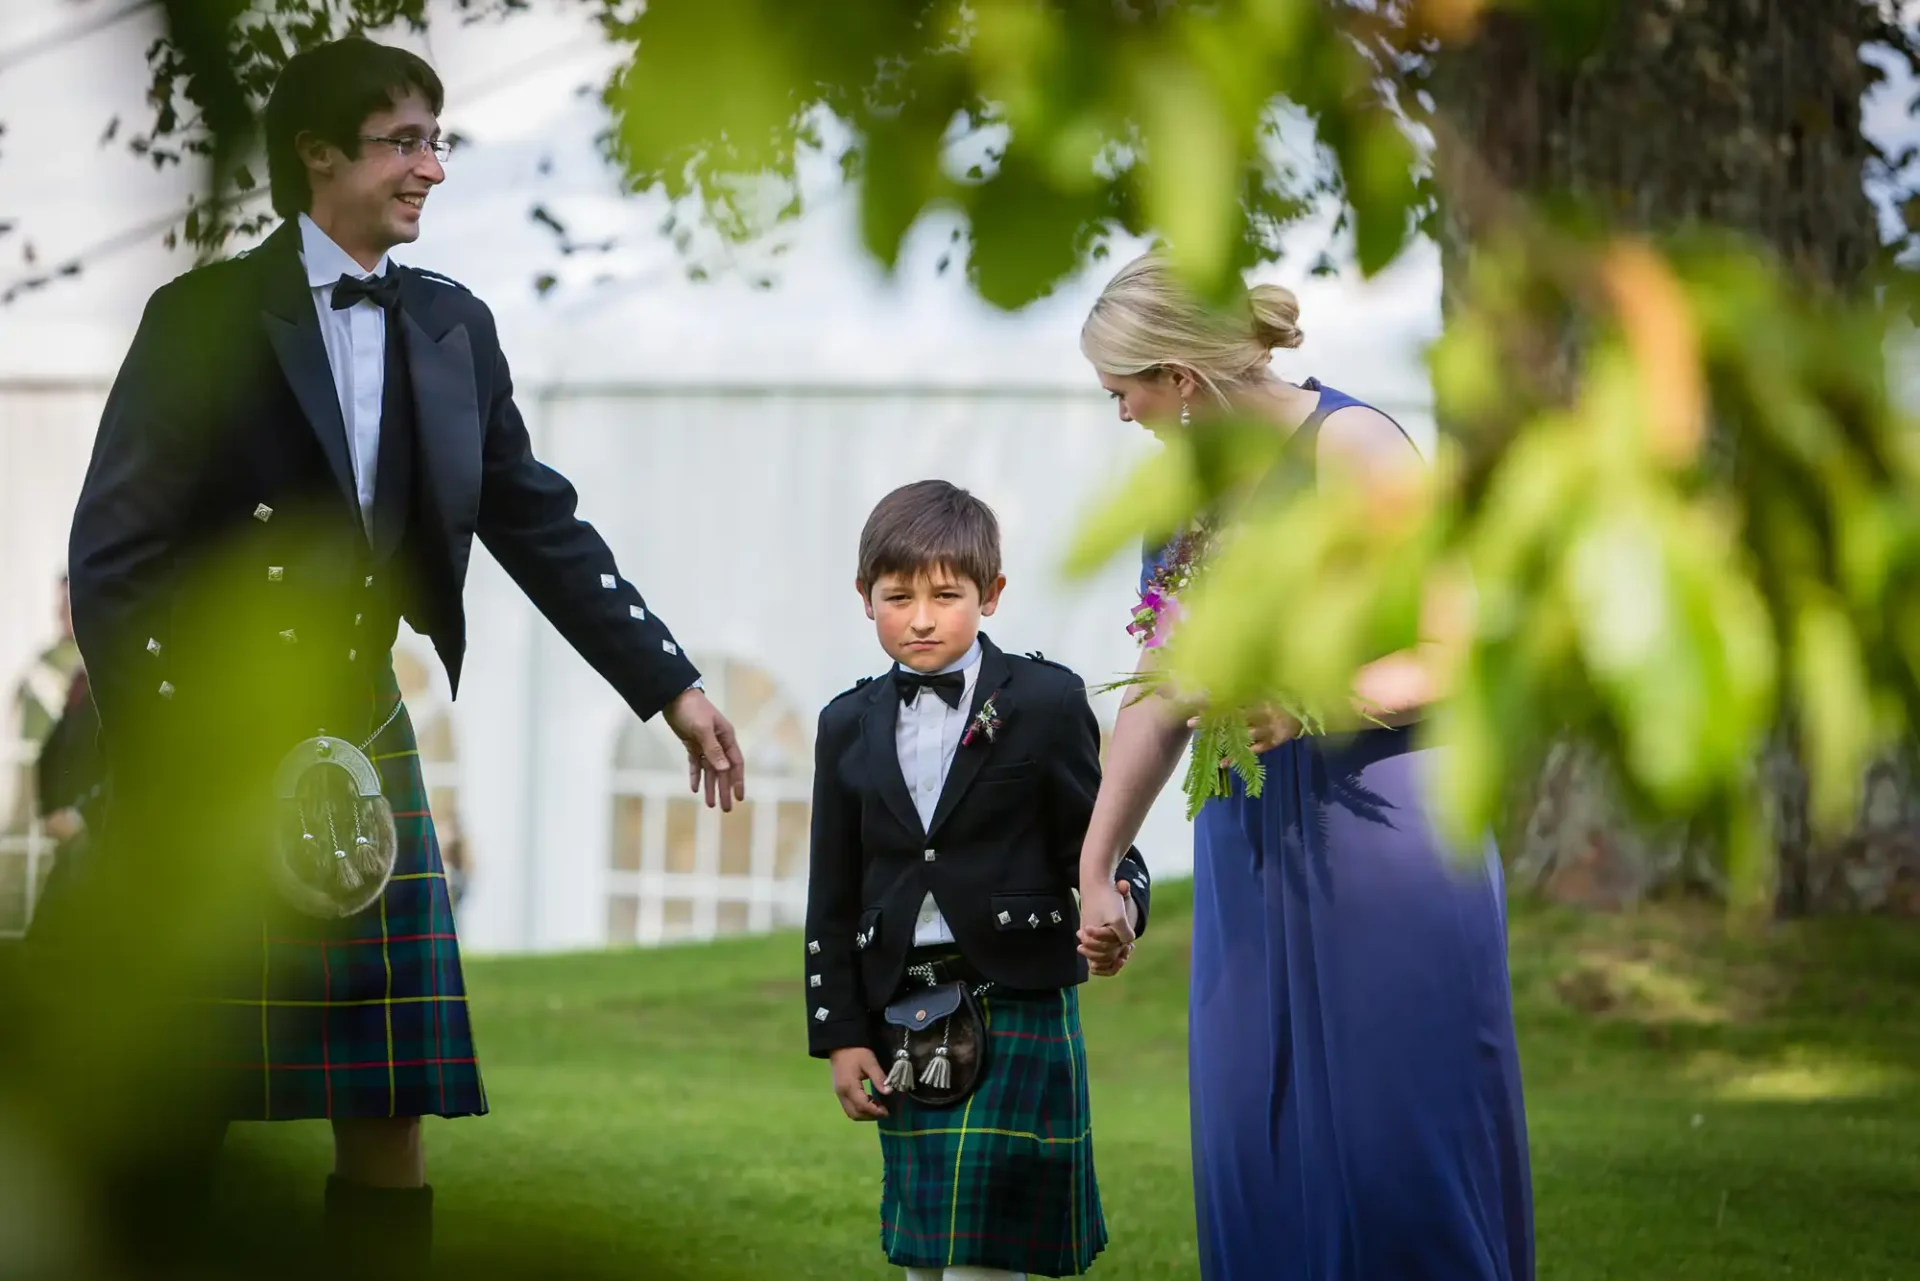 A man and a woman in formal wear interact with a young boy in a kilt at an outdoor event, with bubbles visible around them.